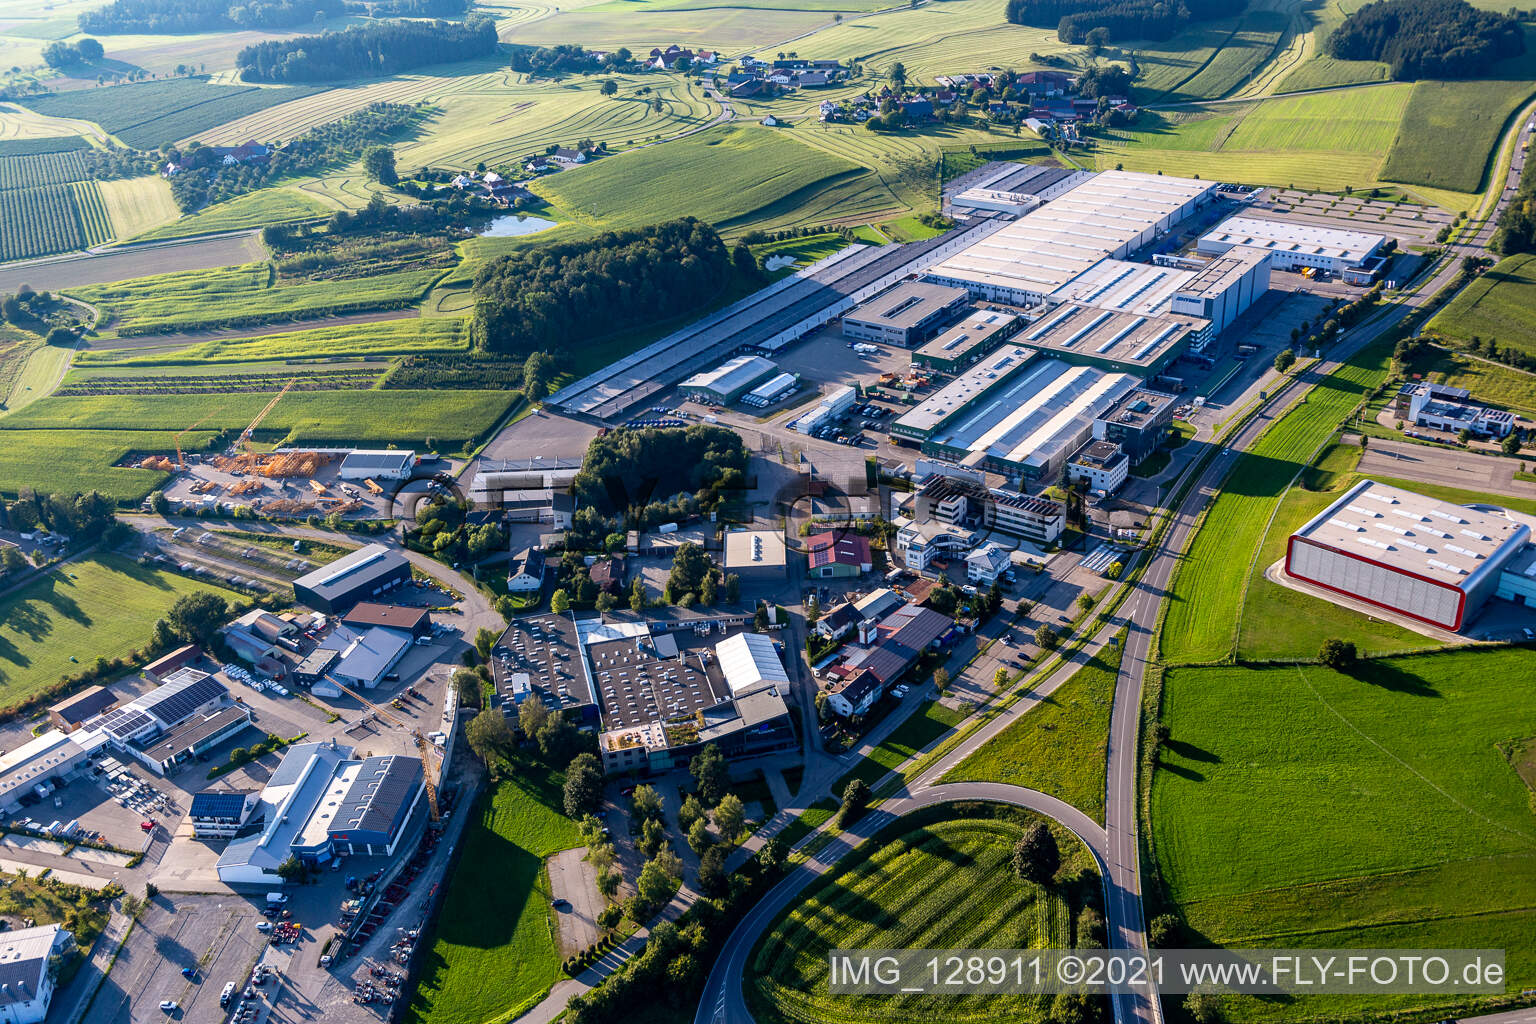 Hymer GmbH & Co in Bad Waldsee in the state Baden-Wuerttemberg, Germany